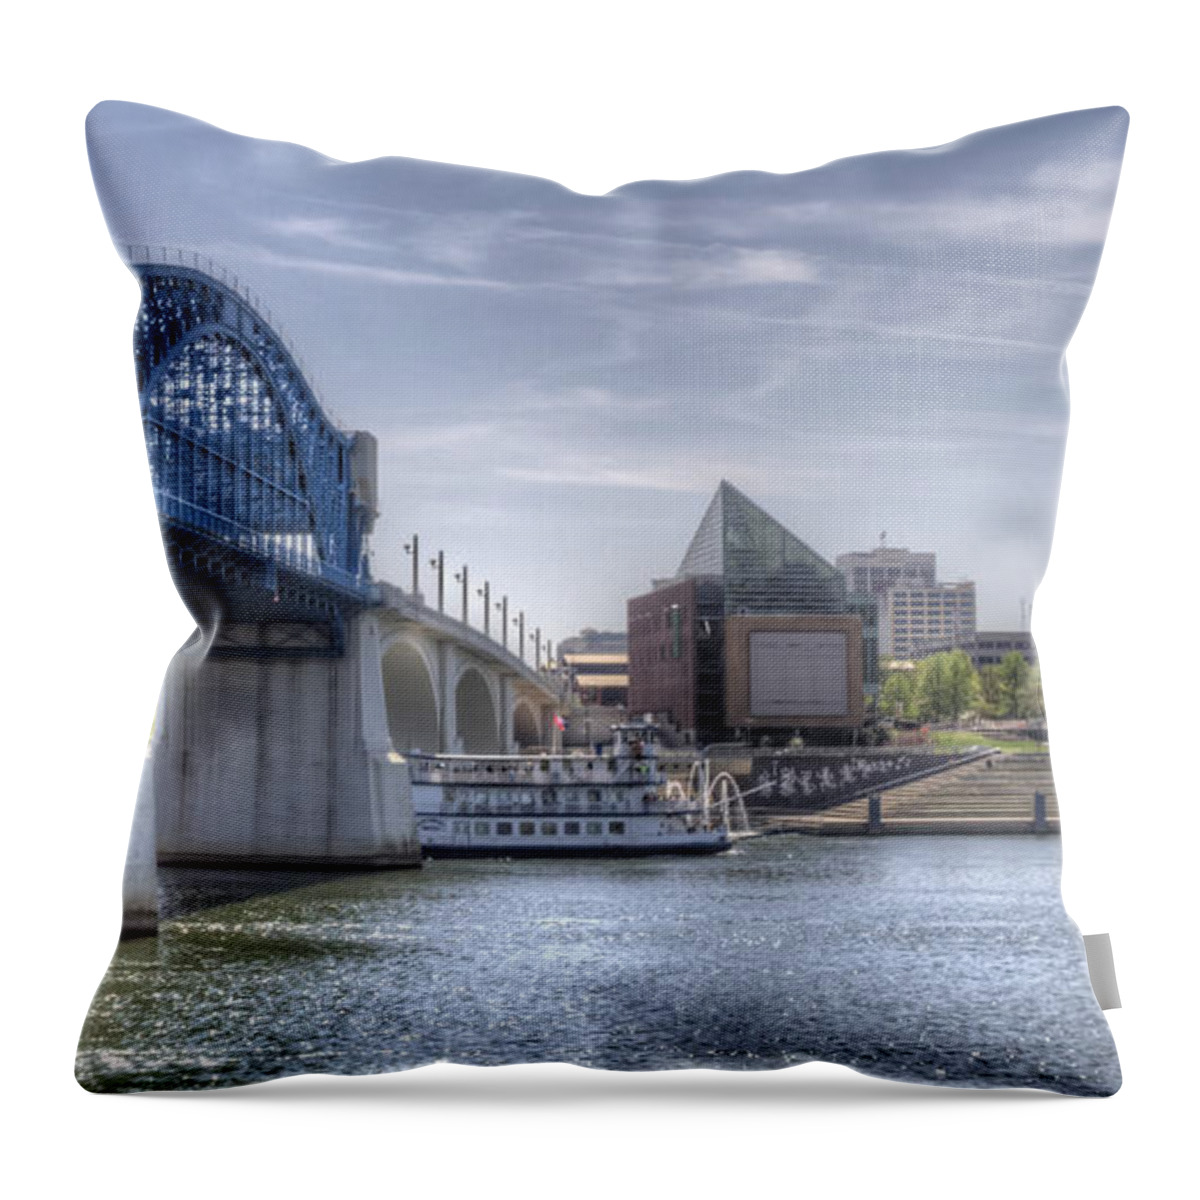 Chattanooga Throw Pillow featuring the photograph Riverfront by David Troxel